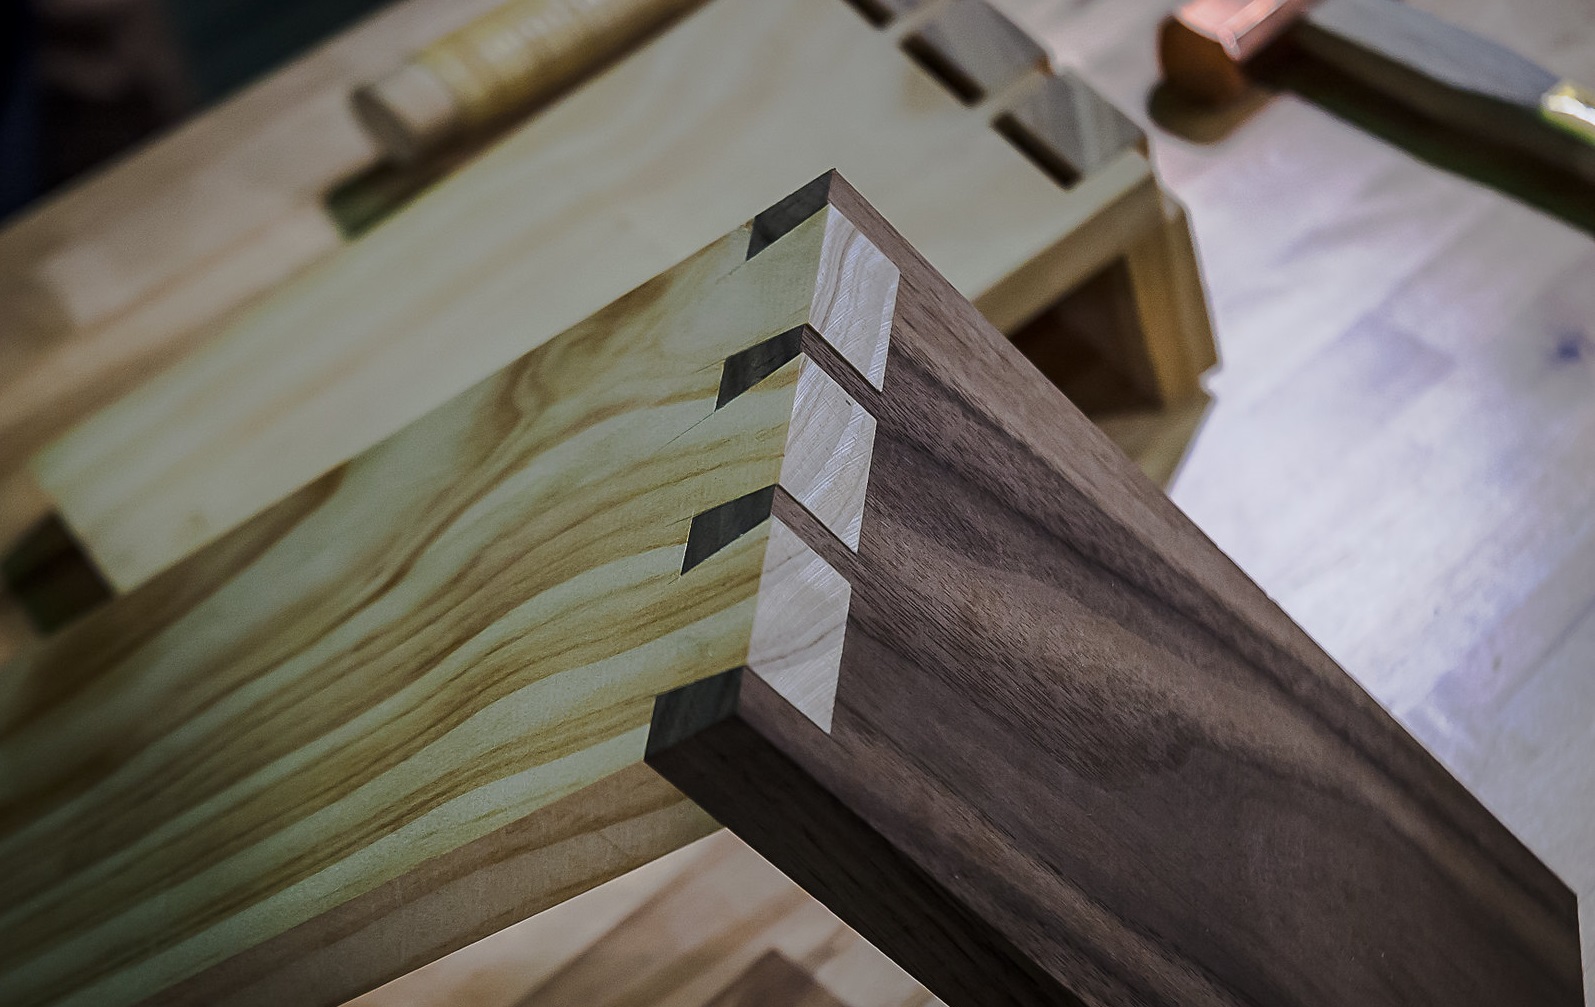 How to Make Dovetail Joints – Basic Steps & Guides